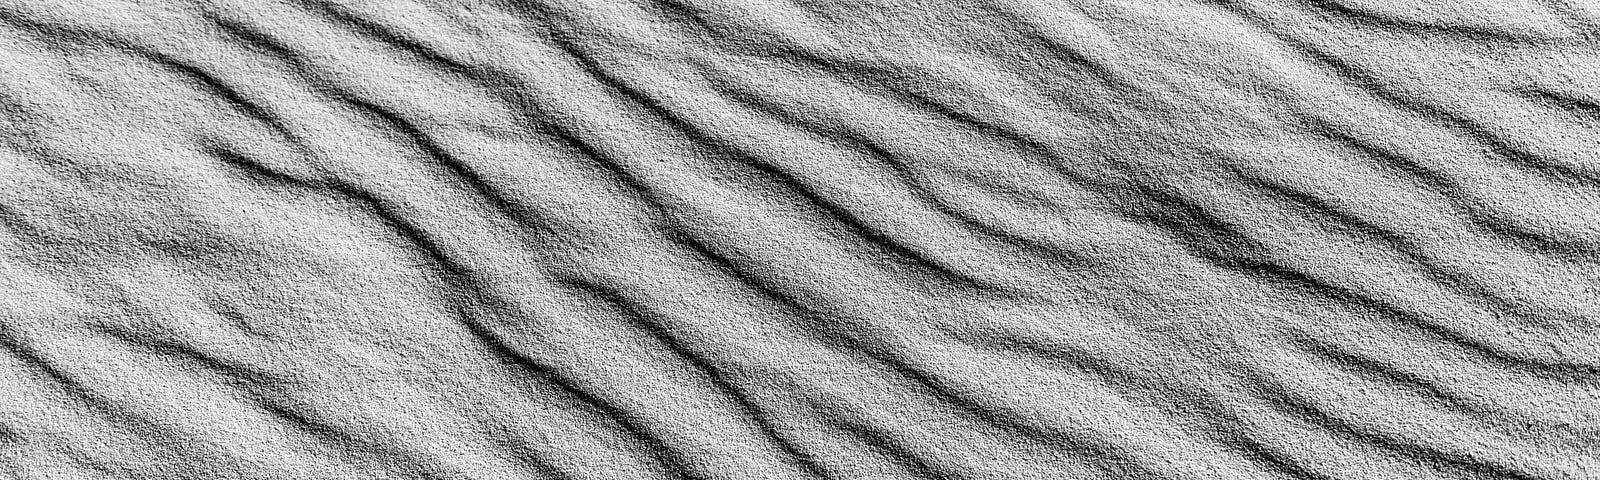 An image of sand ripples